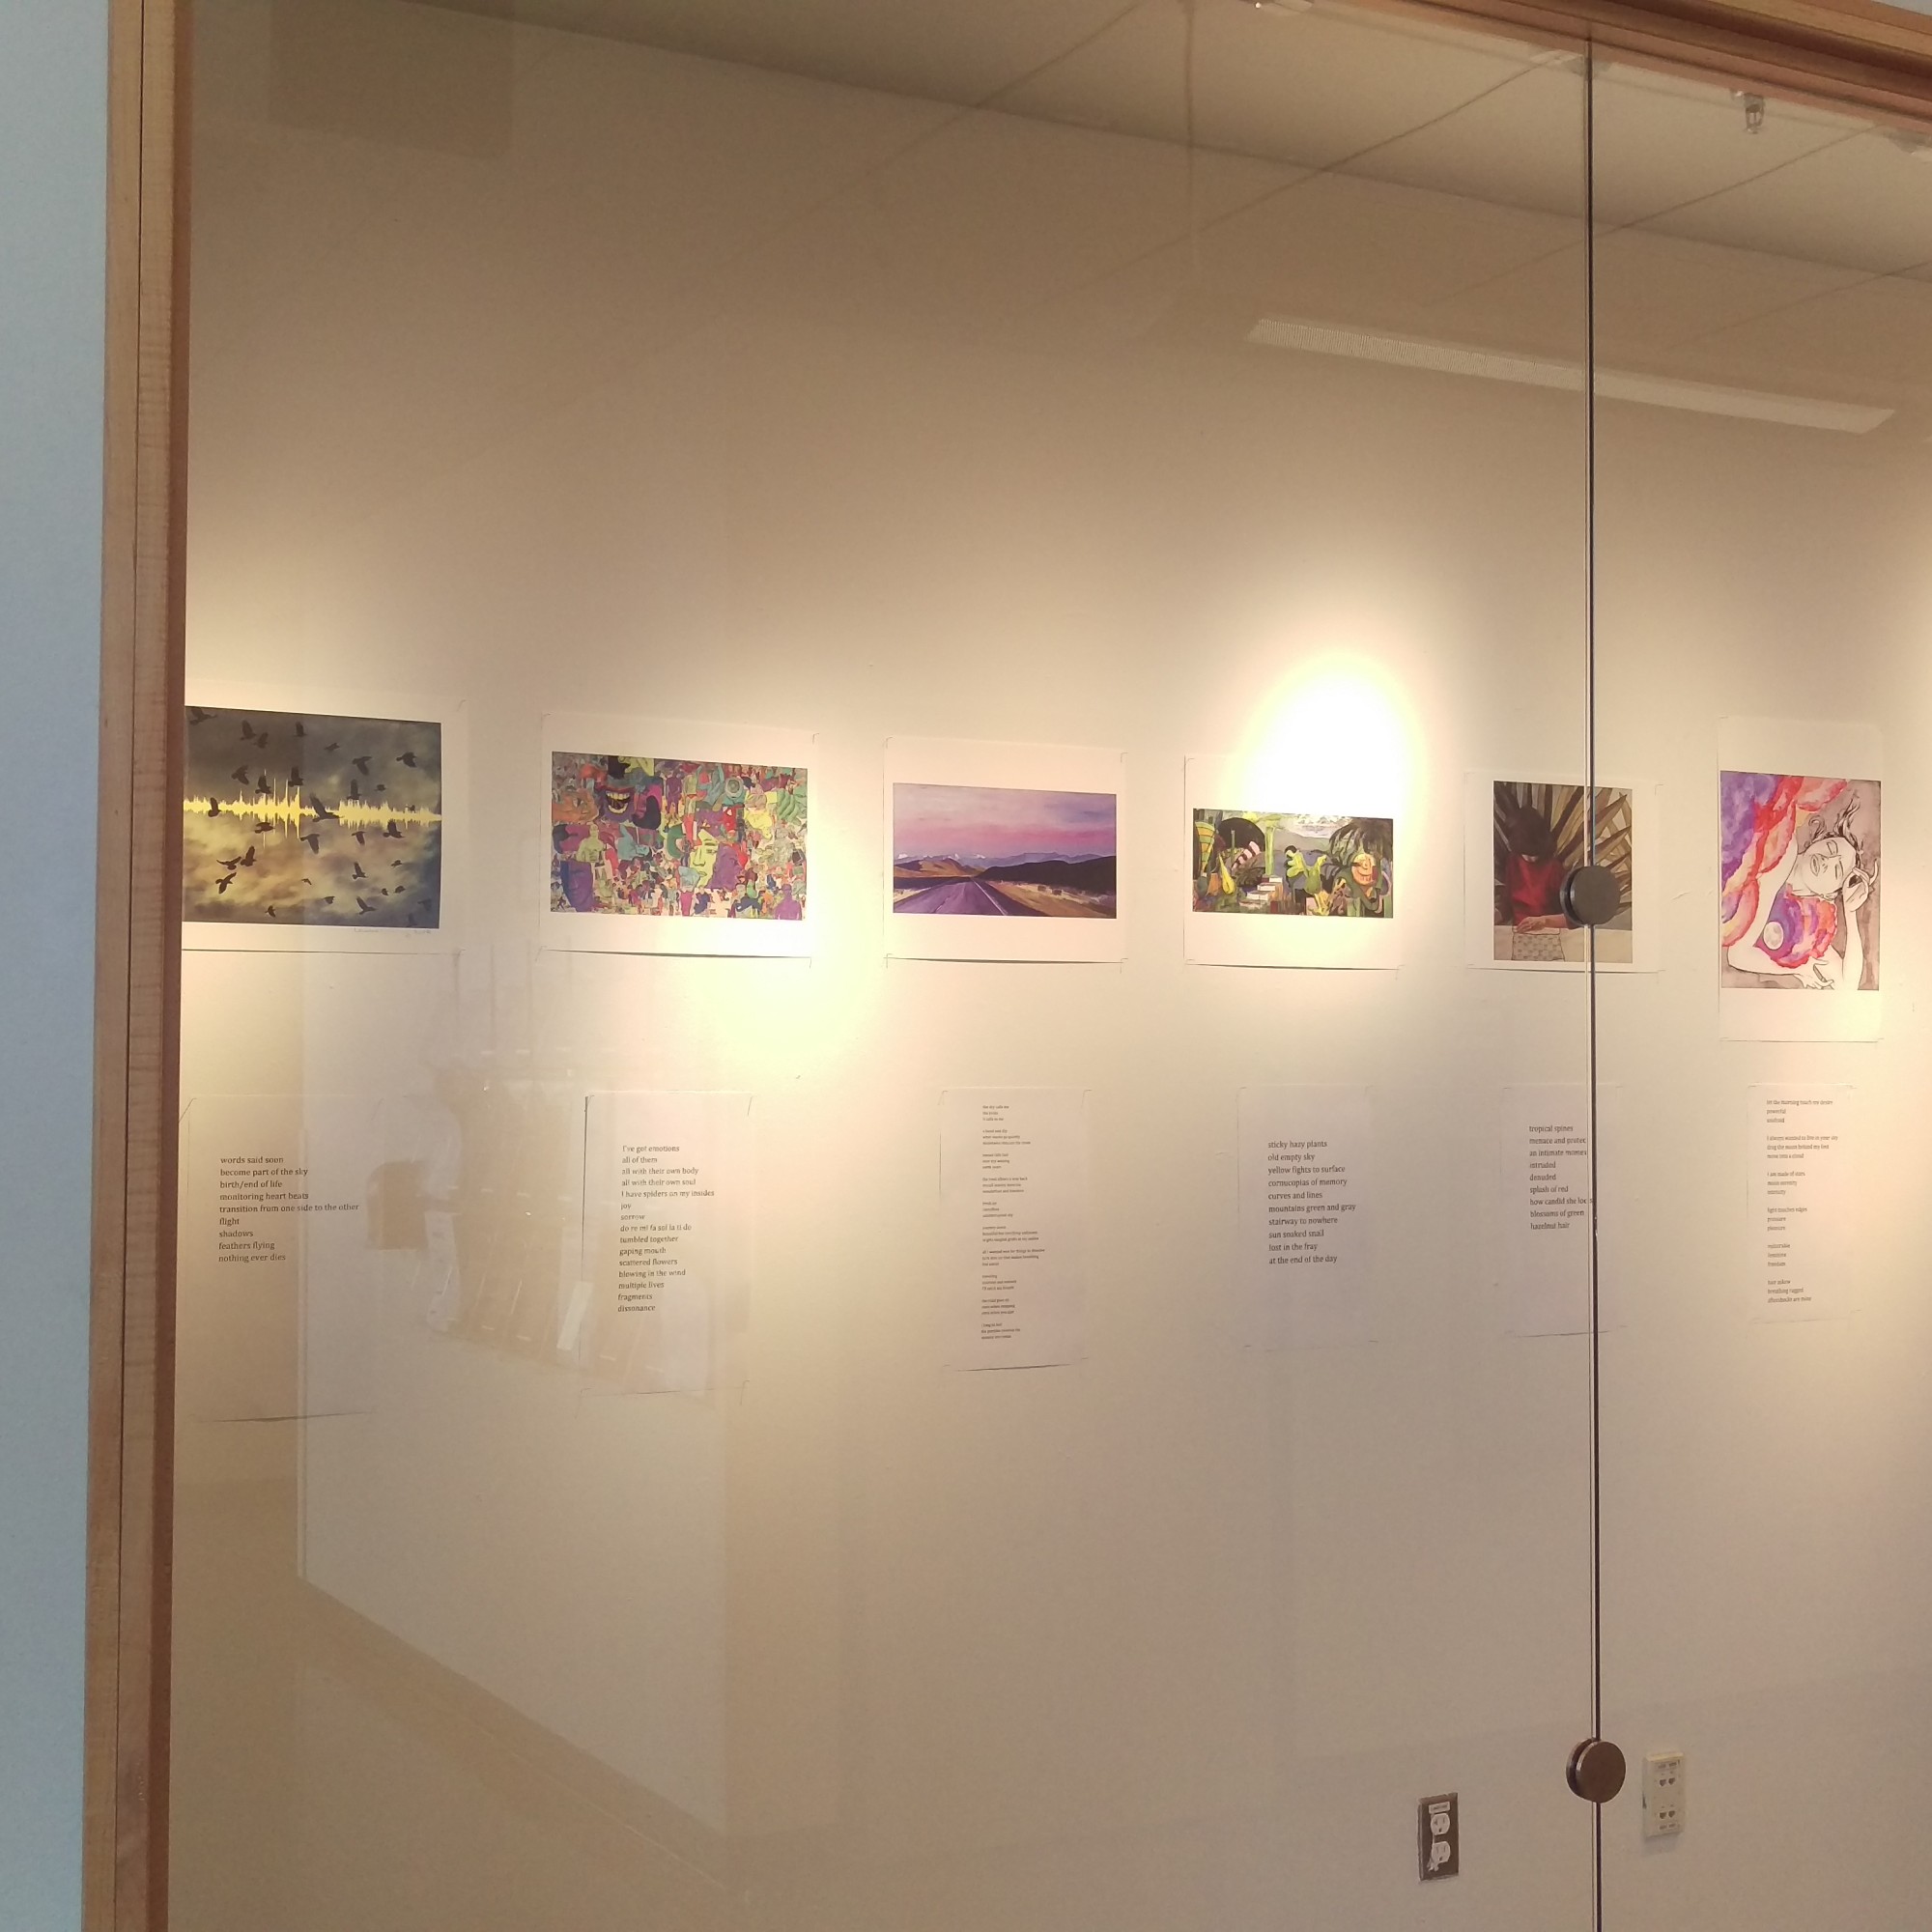 An exhibition of images and poems created during “Muse: A Poetry Workshop